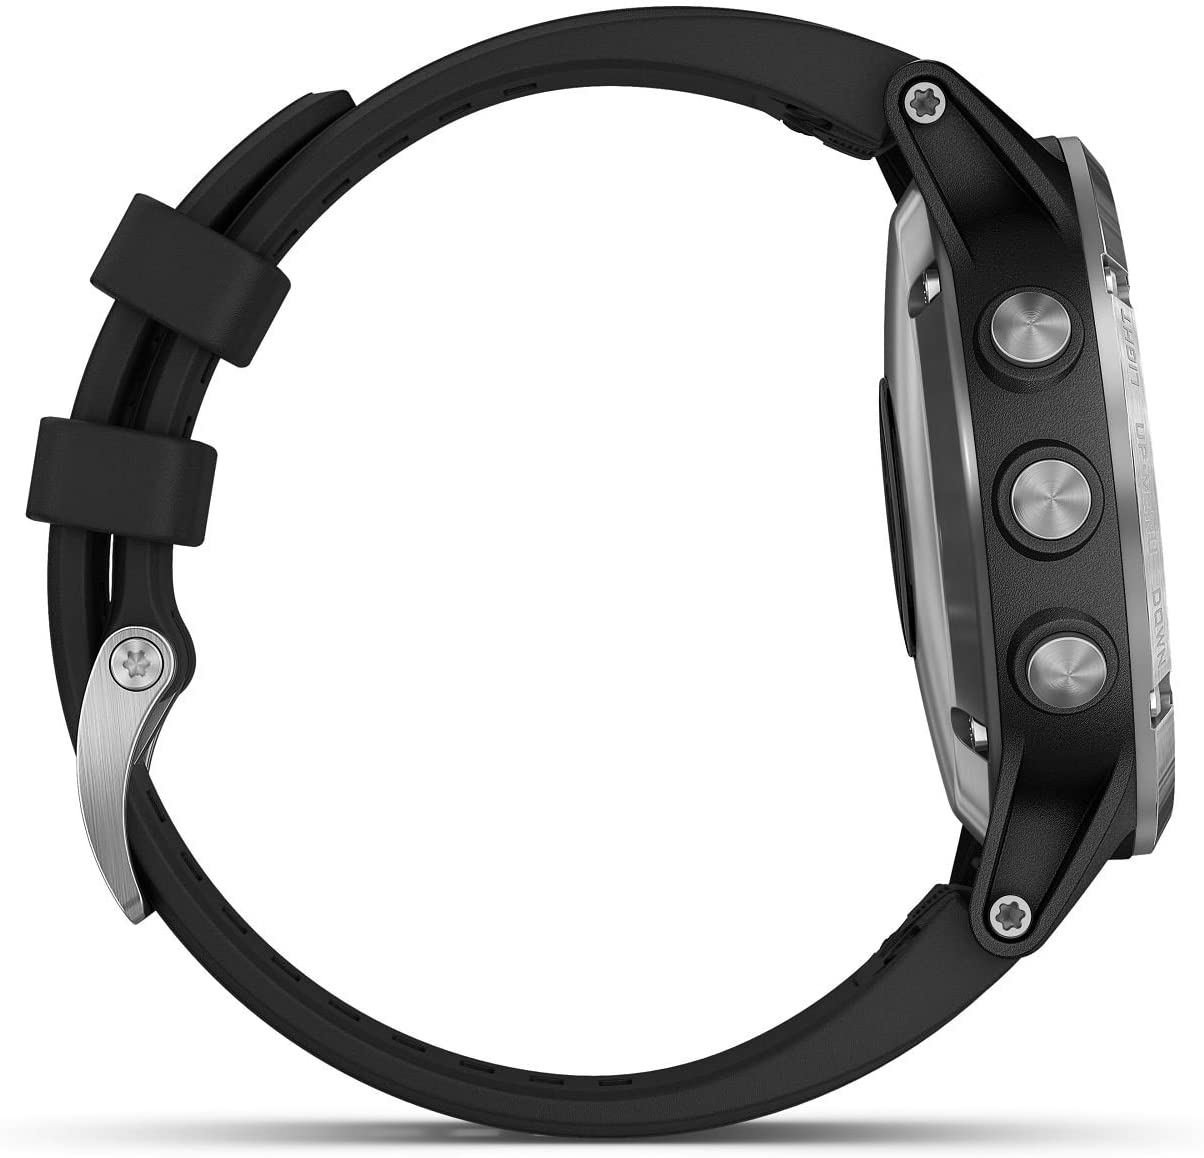 garmin fenix 5 plus multisport watch with music, maps and garmin pay, silver with black band